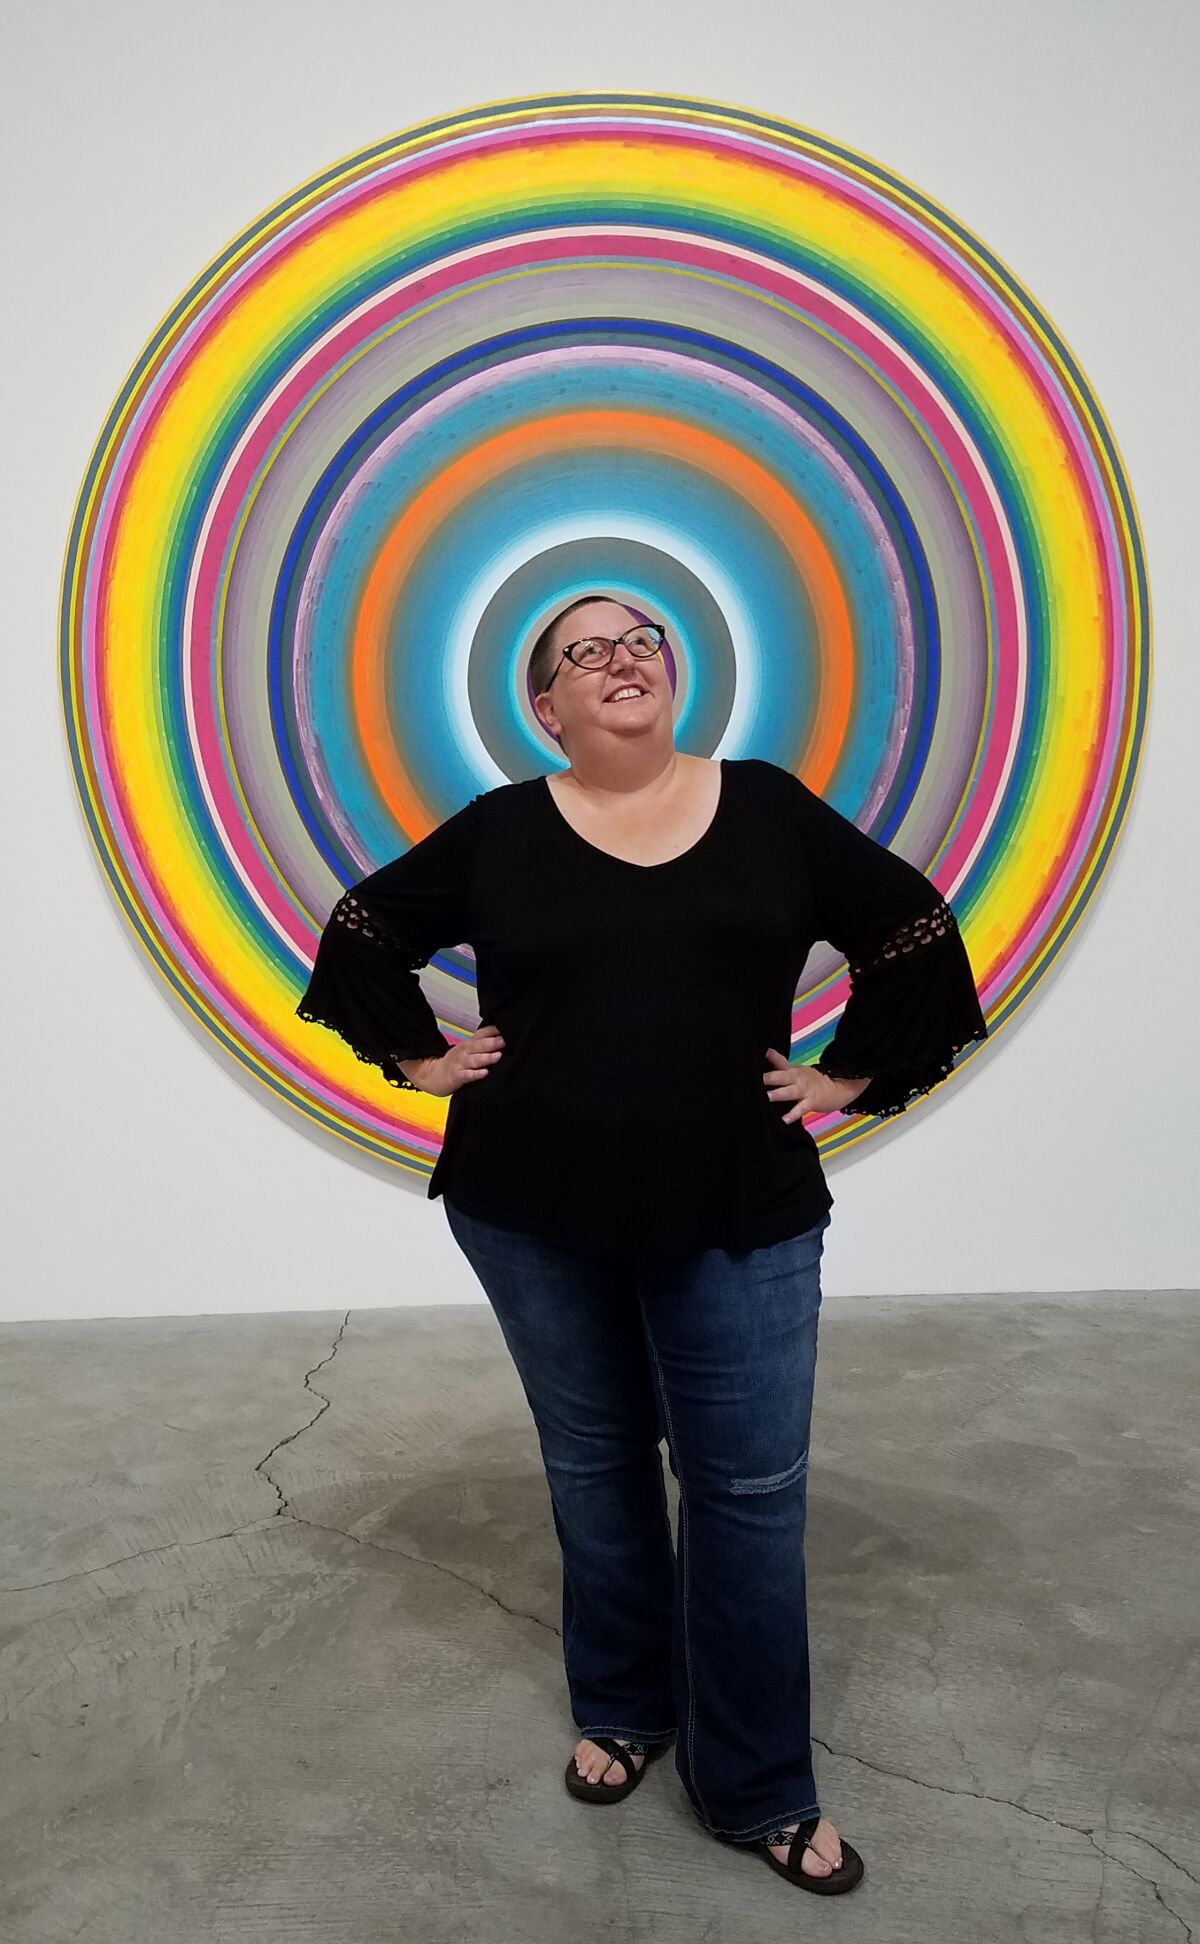 Artist Kristine Schomaker, photographed in front of artwork by Gary Lang